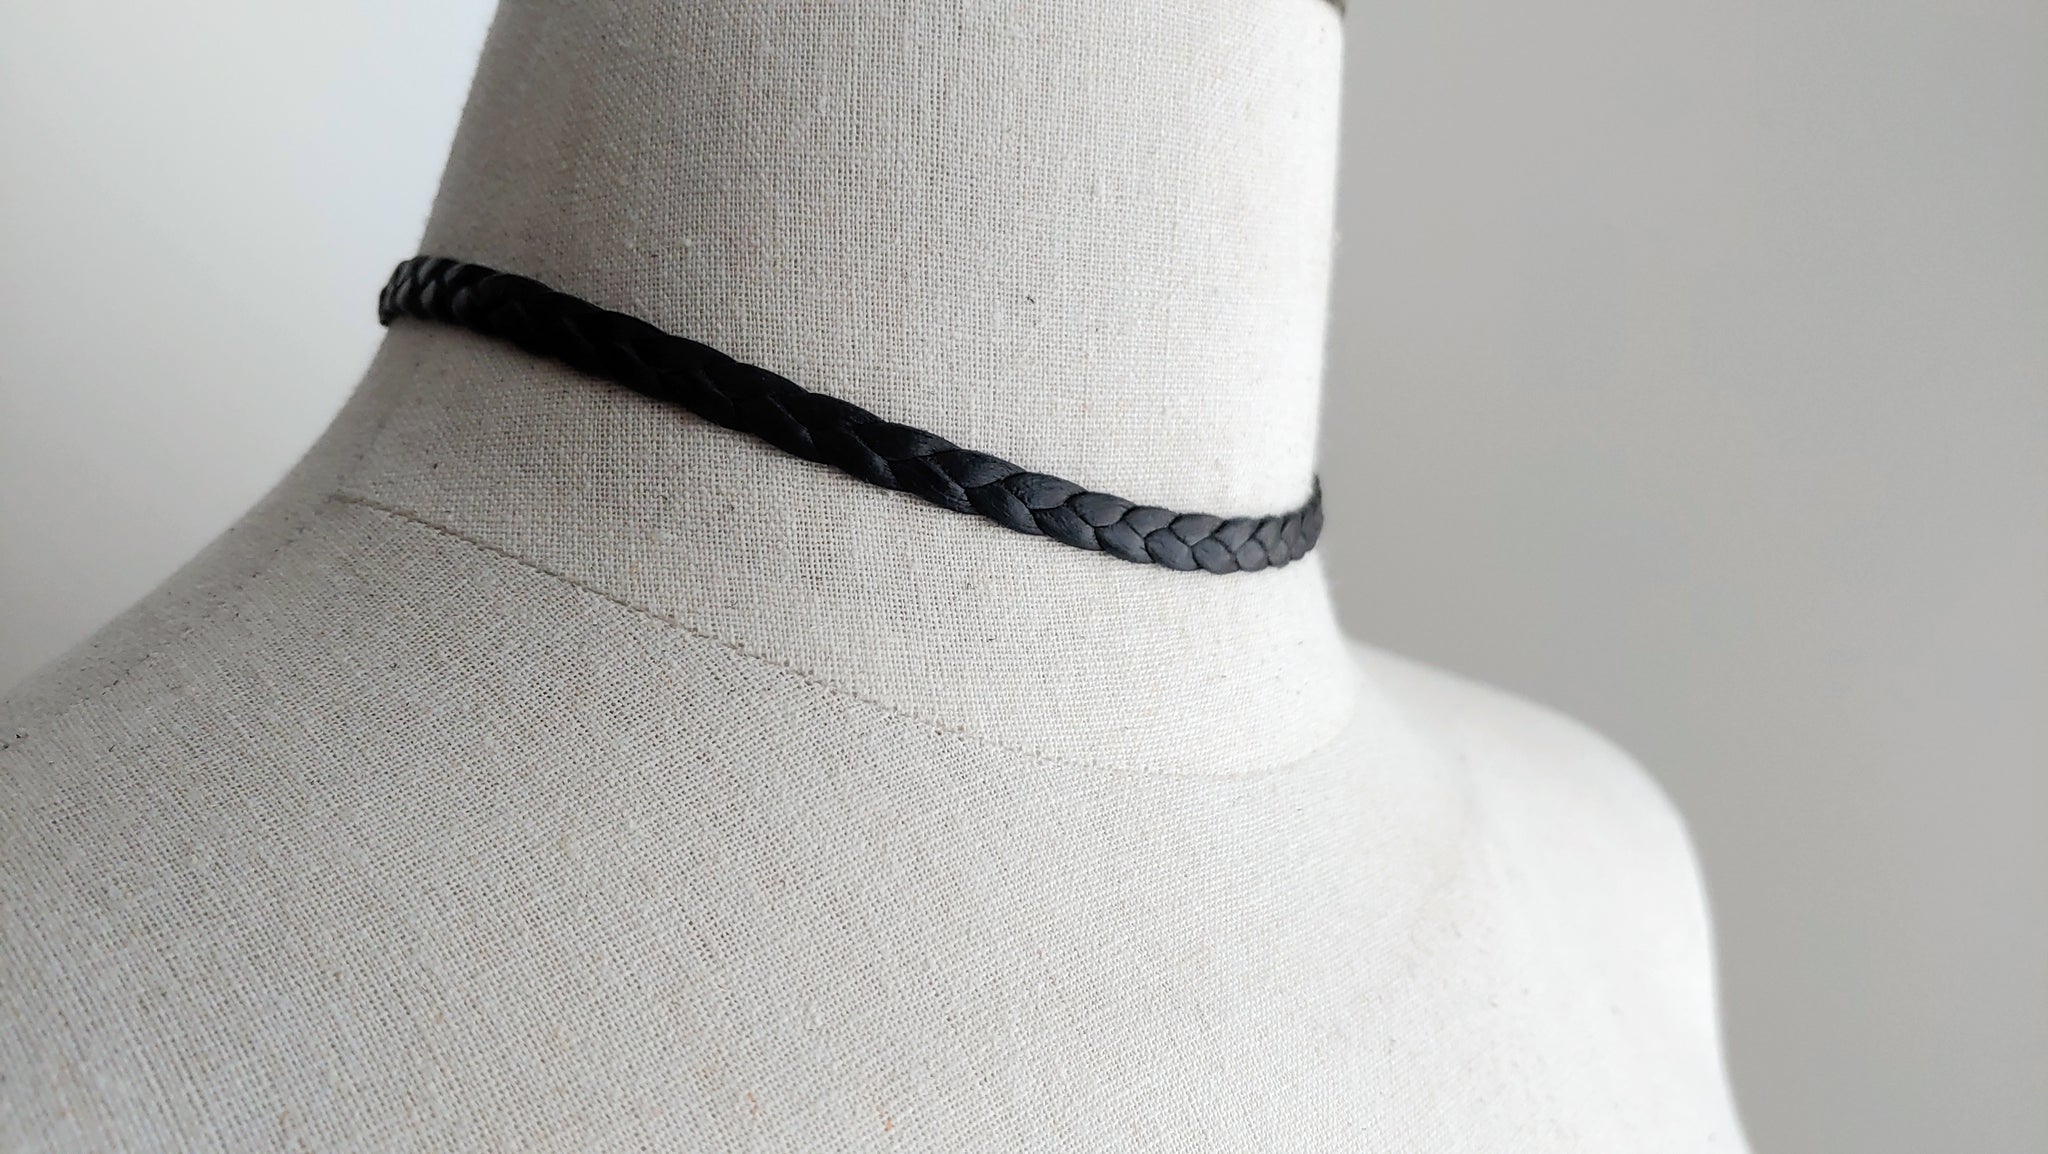 Buy Men's Necklace, Mens Choker Necklace, Mens Leather Necklace, Mens  Jewelry, Minimal Style Jewelry, Masculine Necklace, Boyfriend Jewelry Gift  Online in India - Etsy